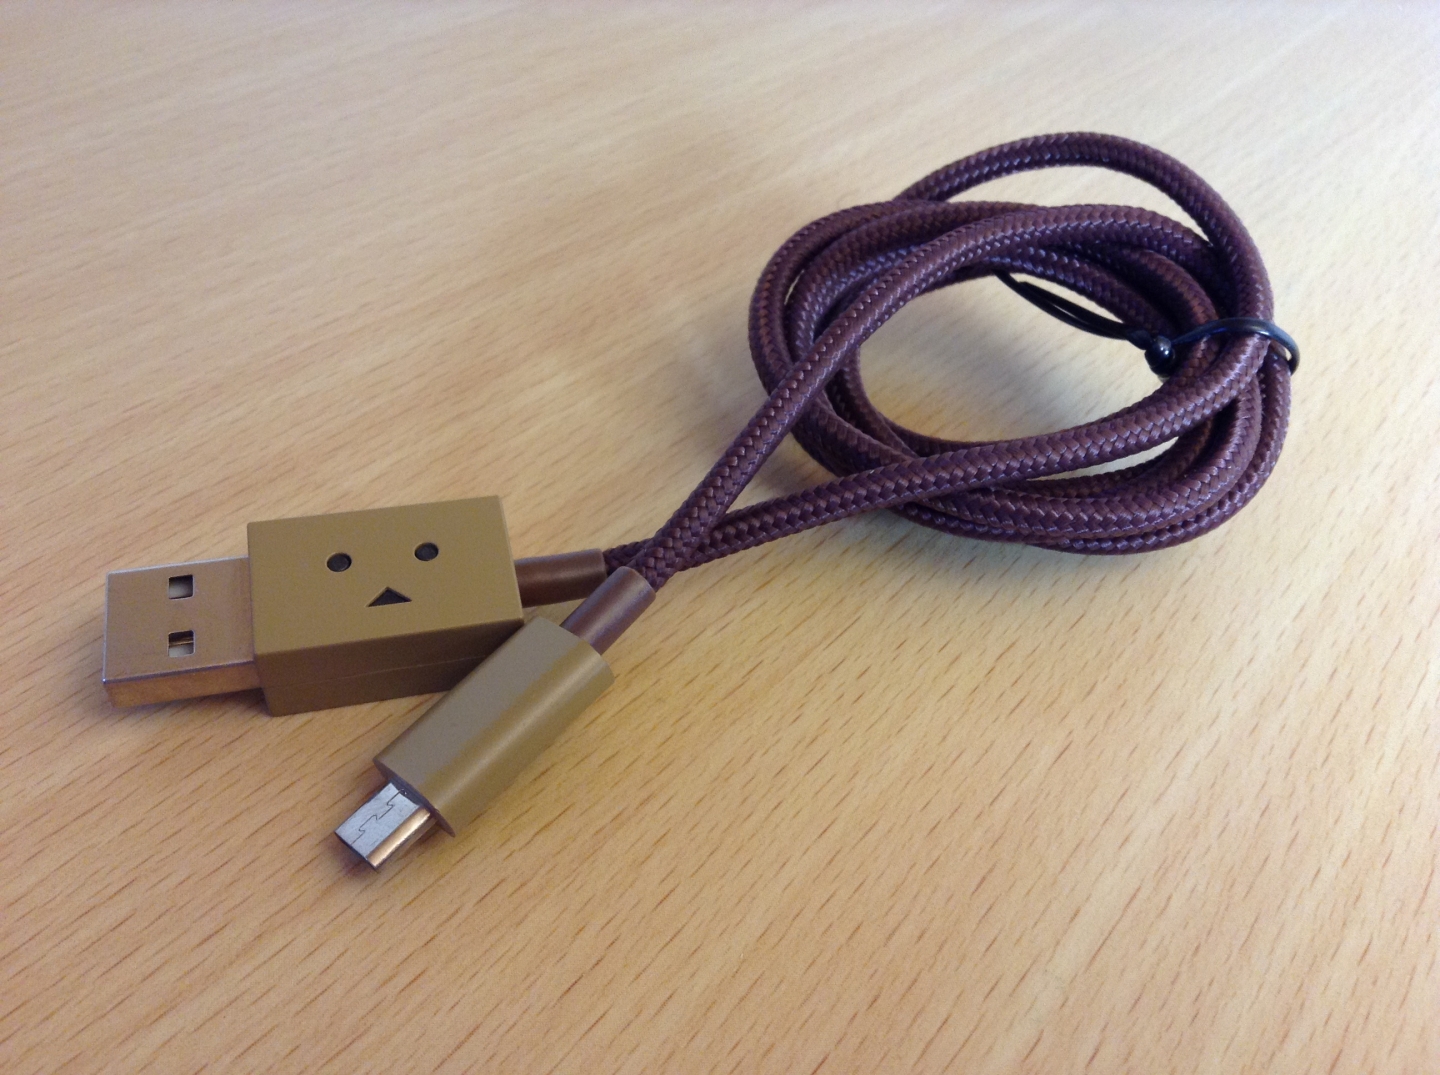 cheero-danboard-usb-cable-with-micro-usb-connector_2